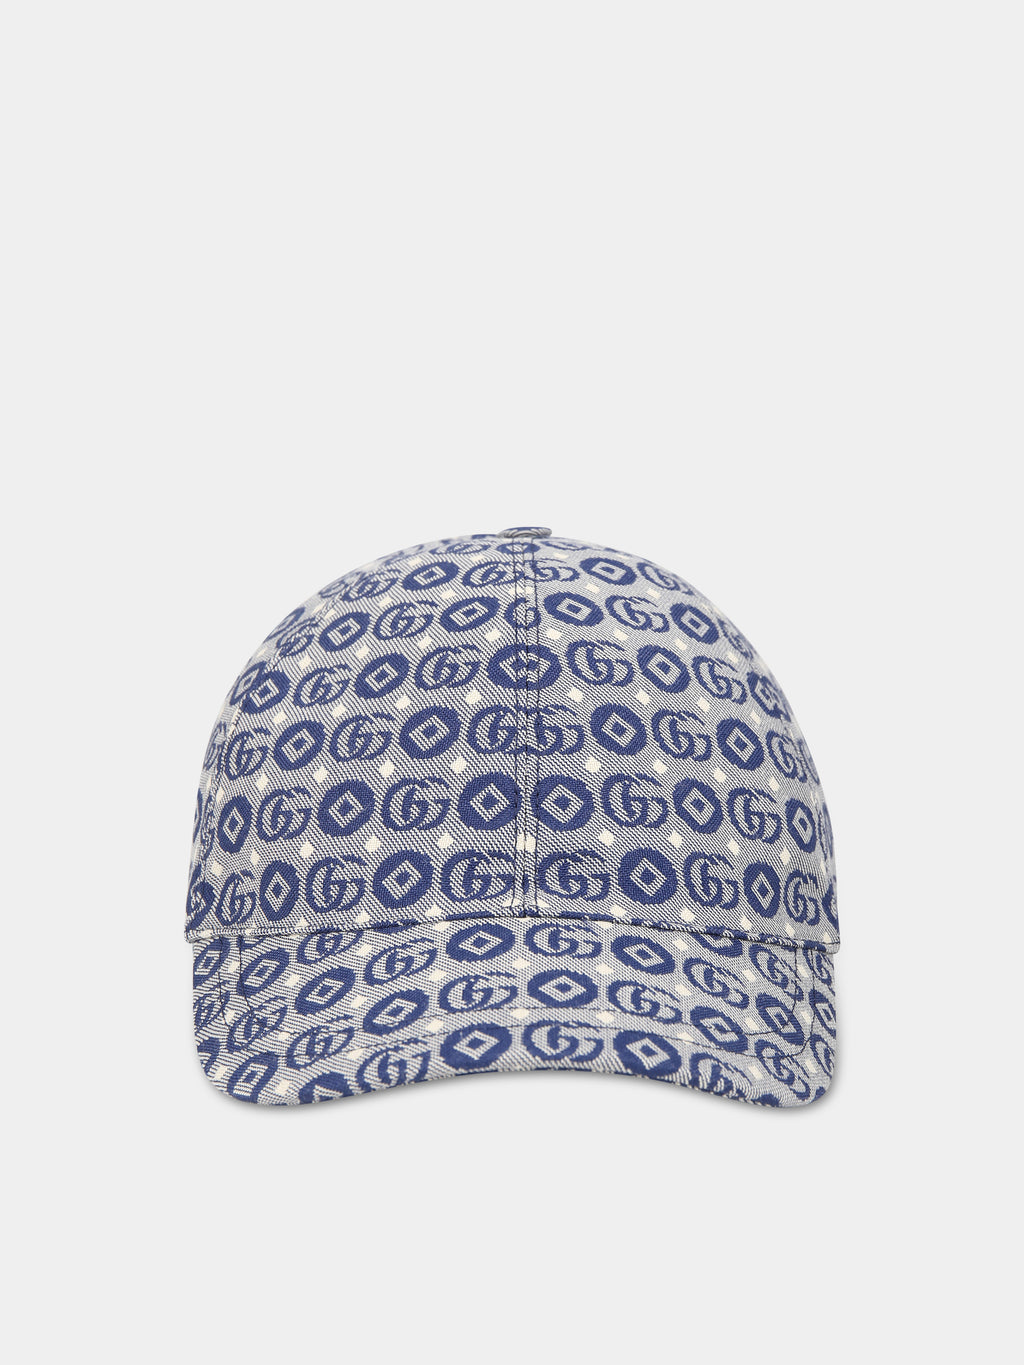 Blue hat for kids with double g